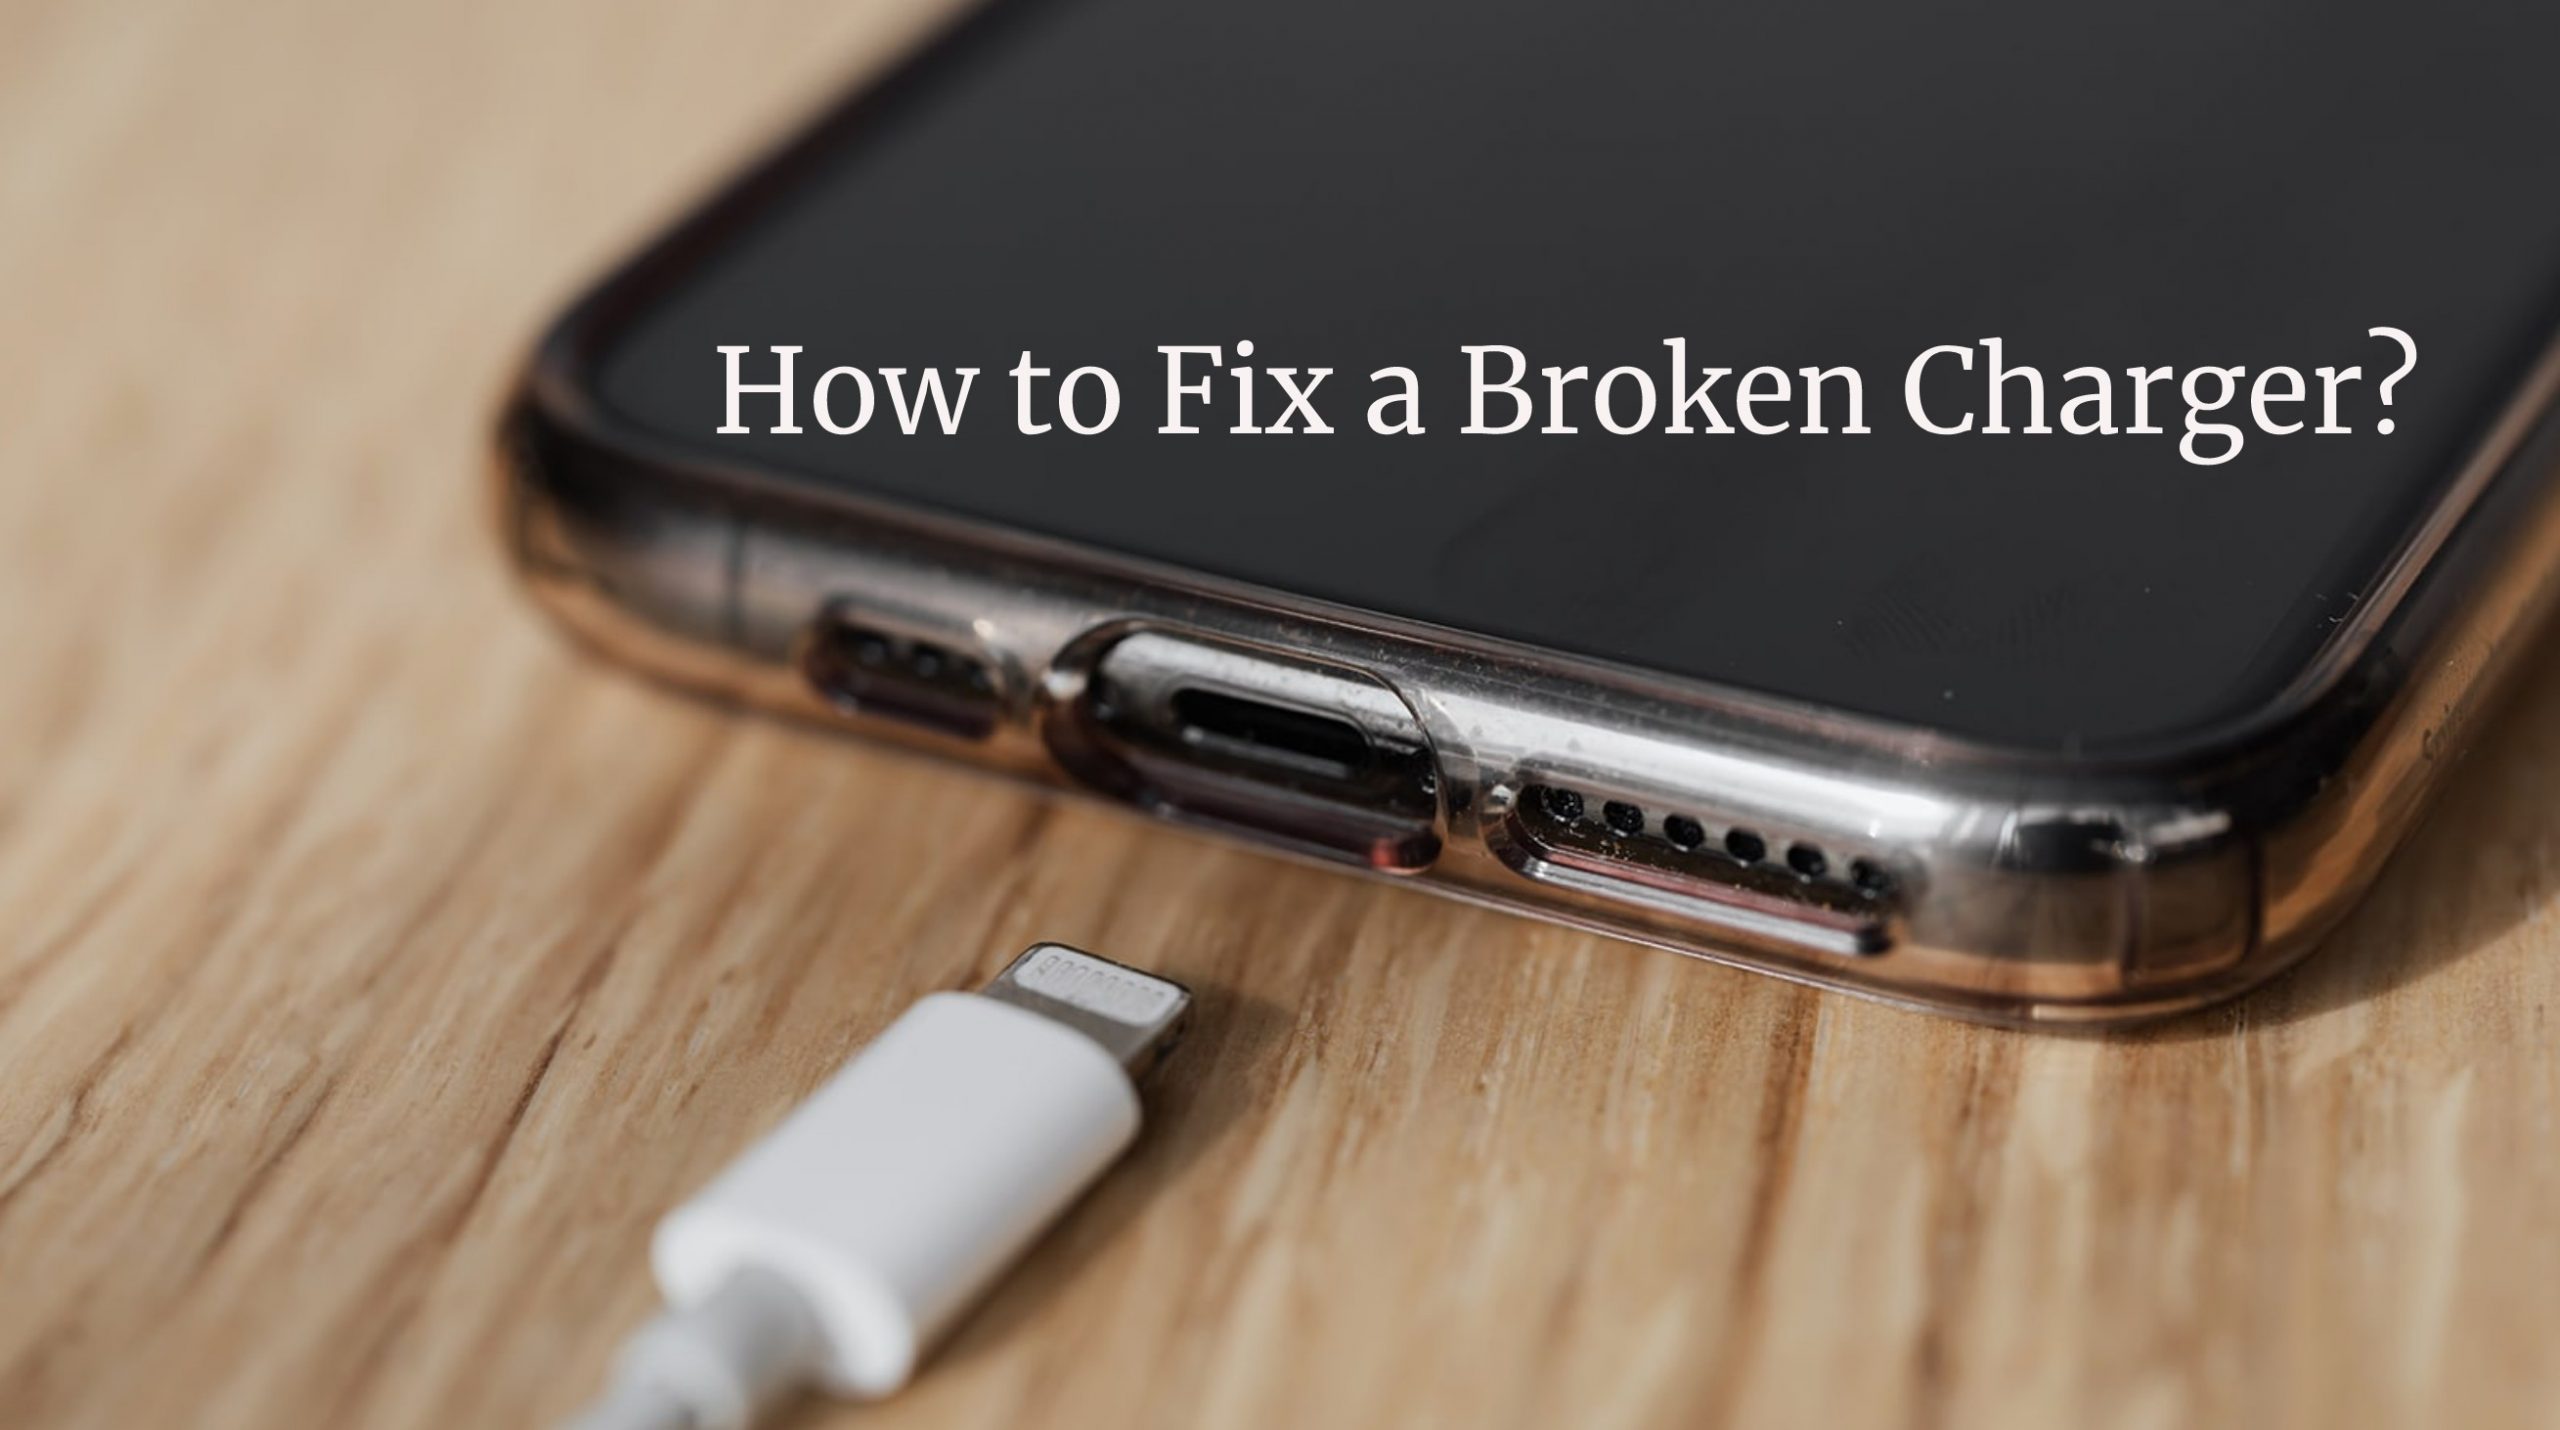 How to fix a broken charger